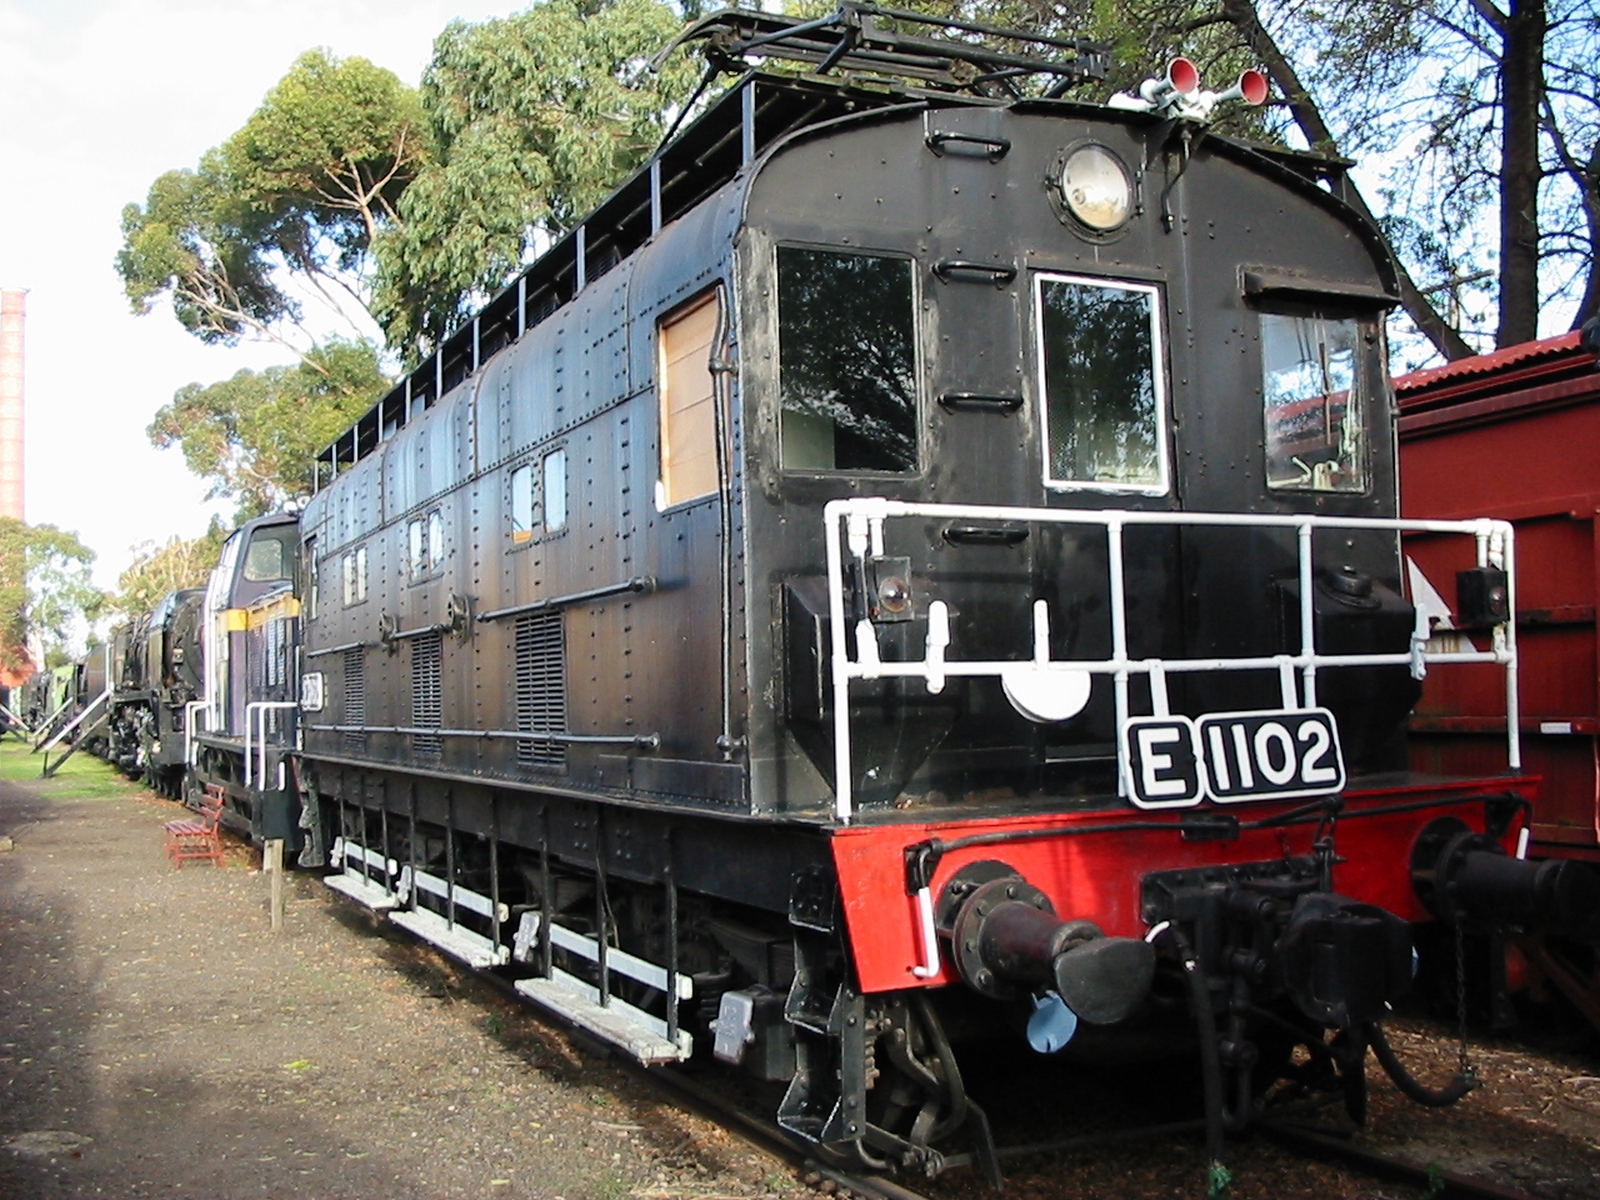 E 1102 at the Newport Railway Museum